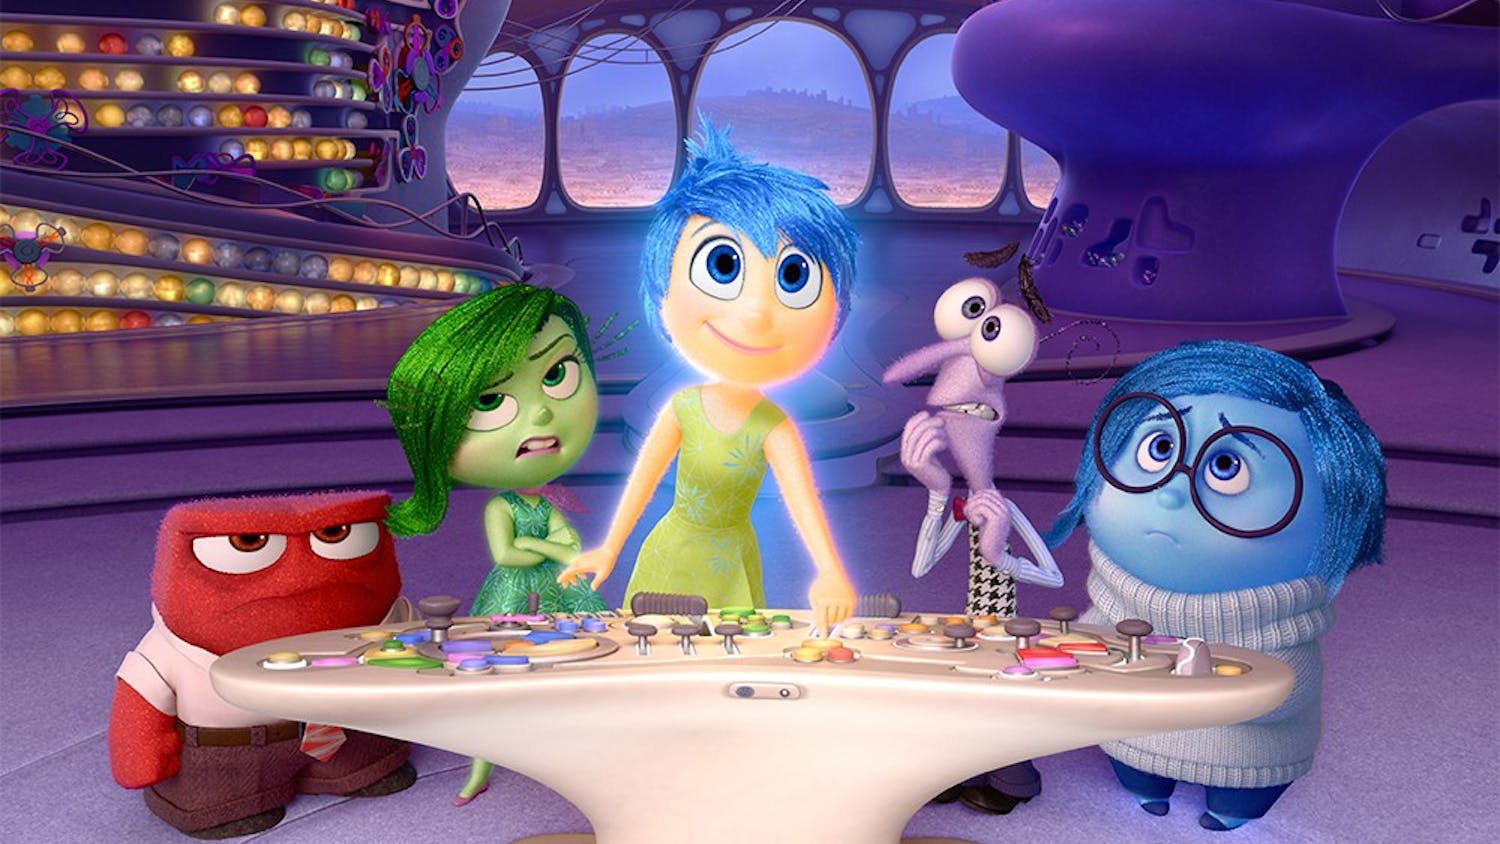 "Inside Out" will screen Monday at the IU Cinema as part of the "Human Connectedness in a Time of Need" series. The film won the 2015 Academy Award for Best Animated Feature.